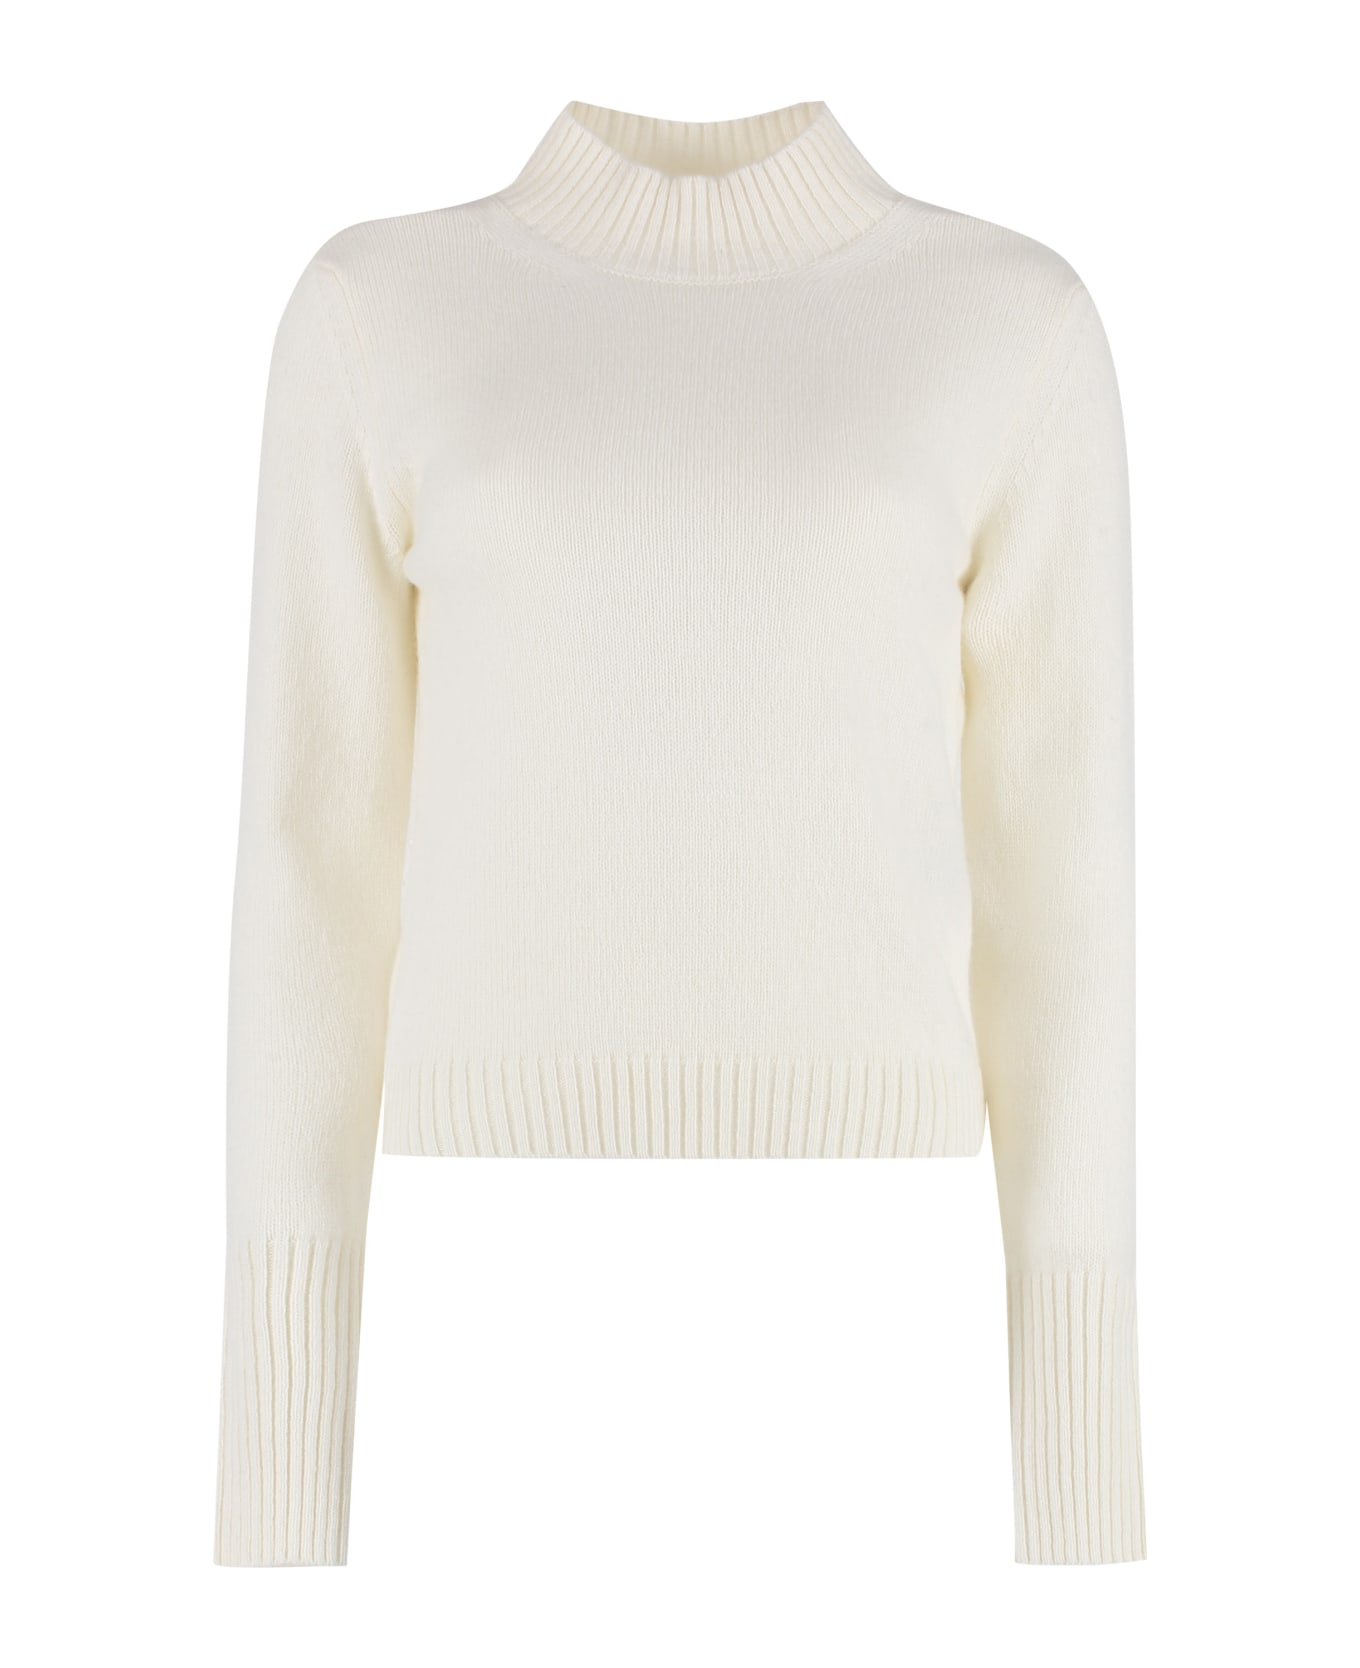 Federica Tosi Wool And Cashmere Sweater - panna